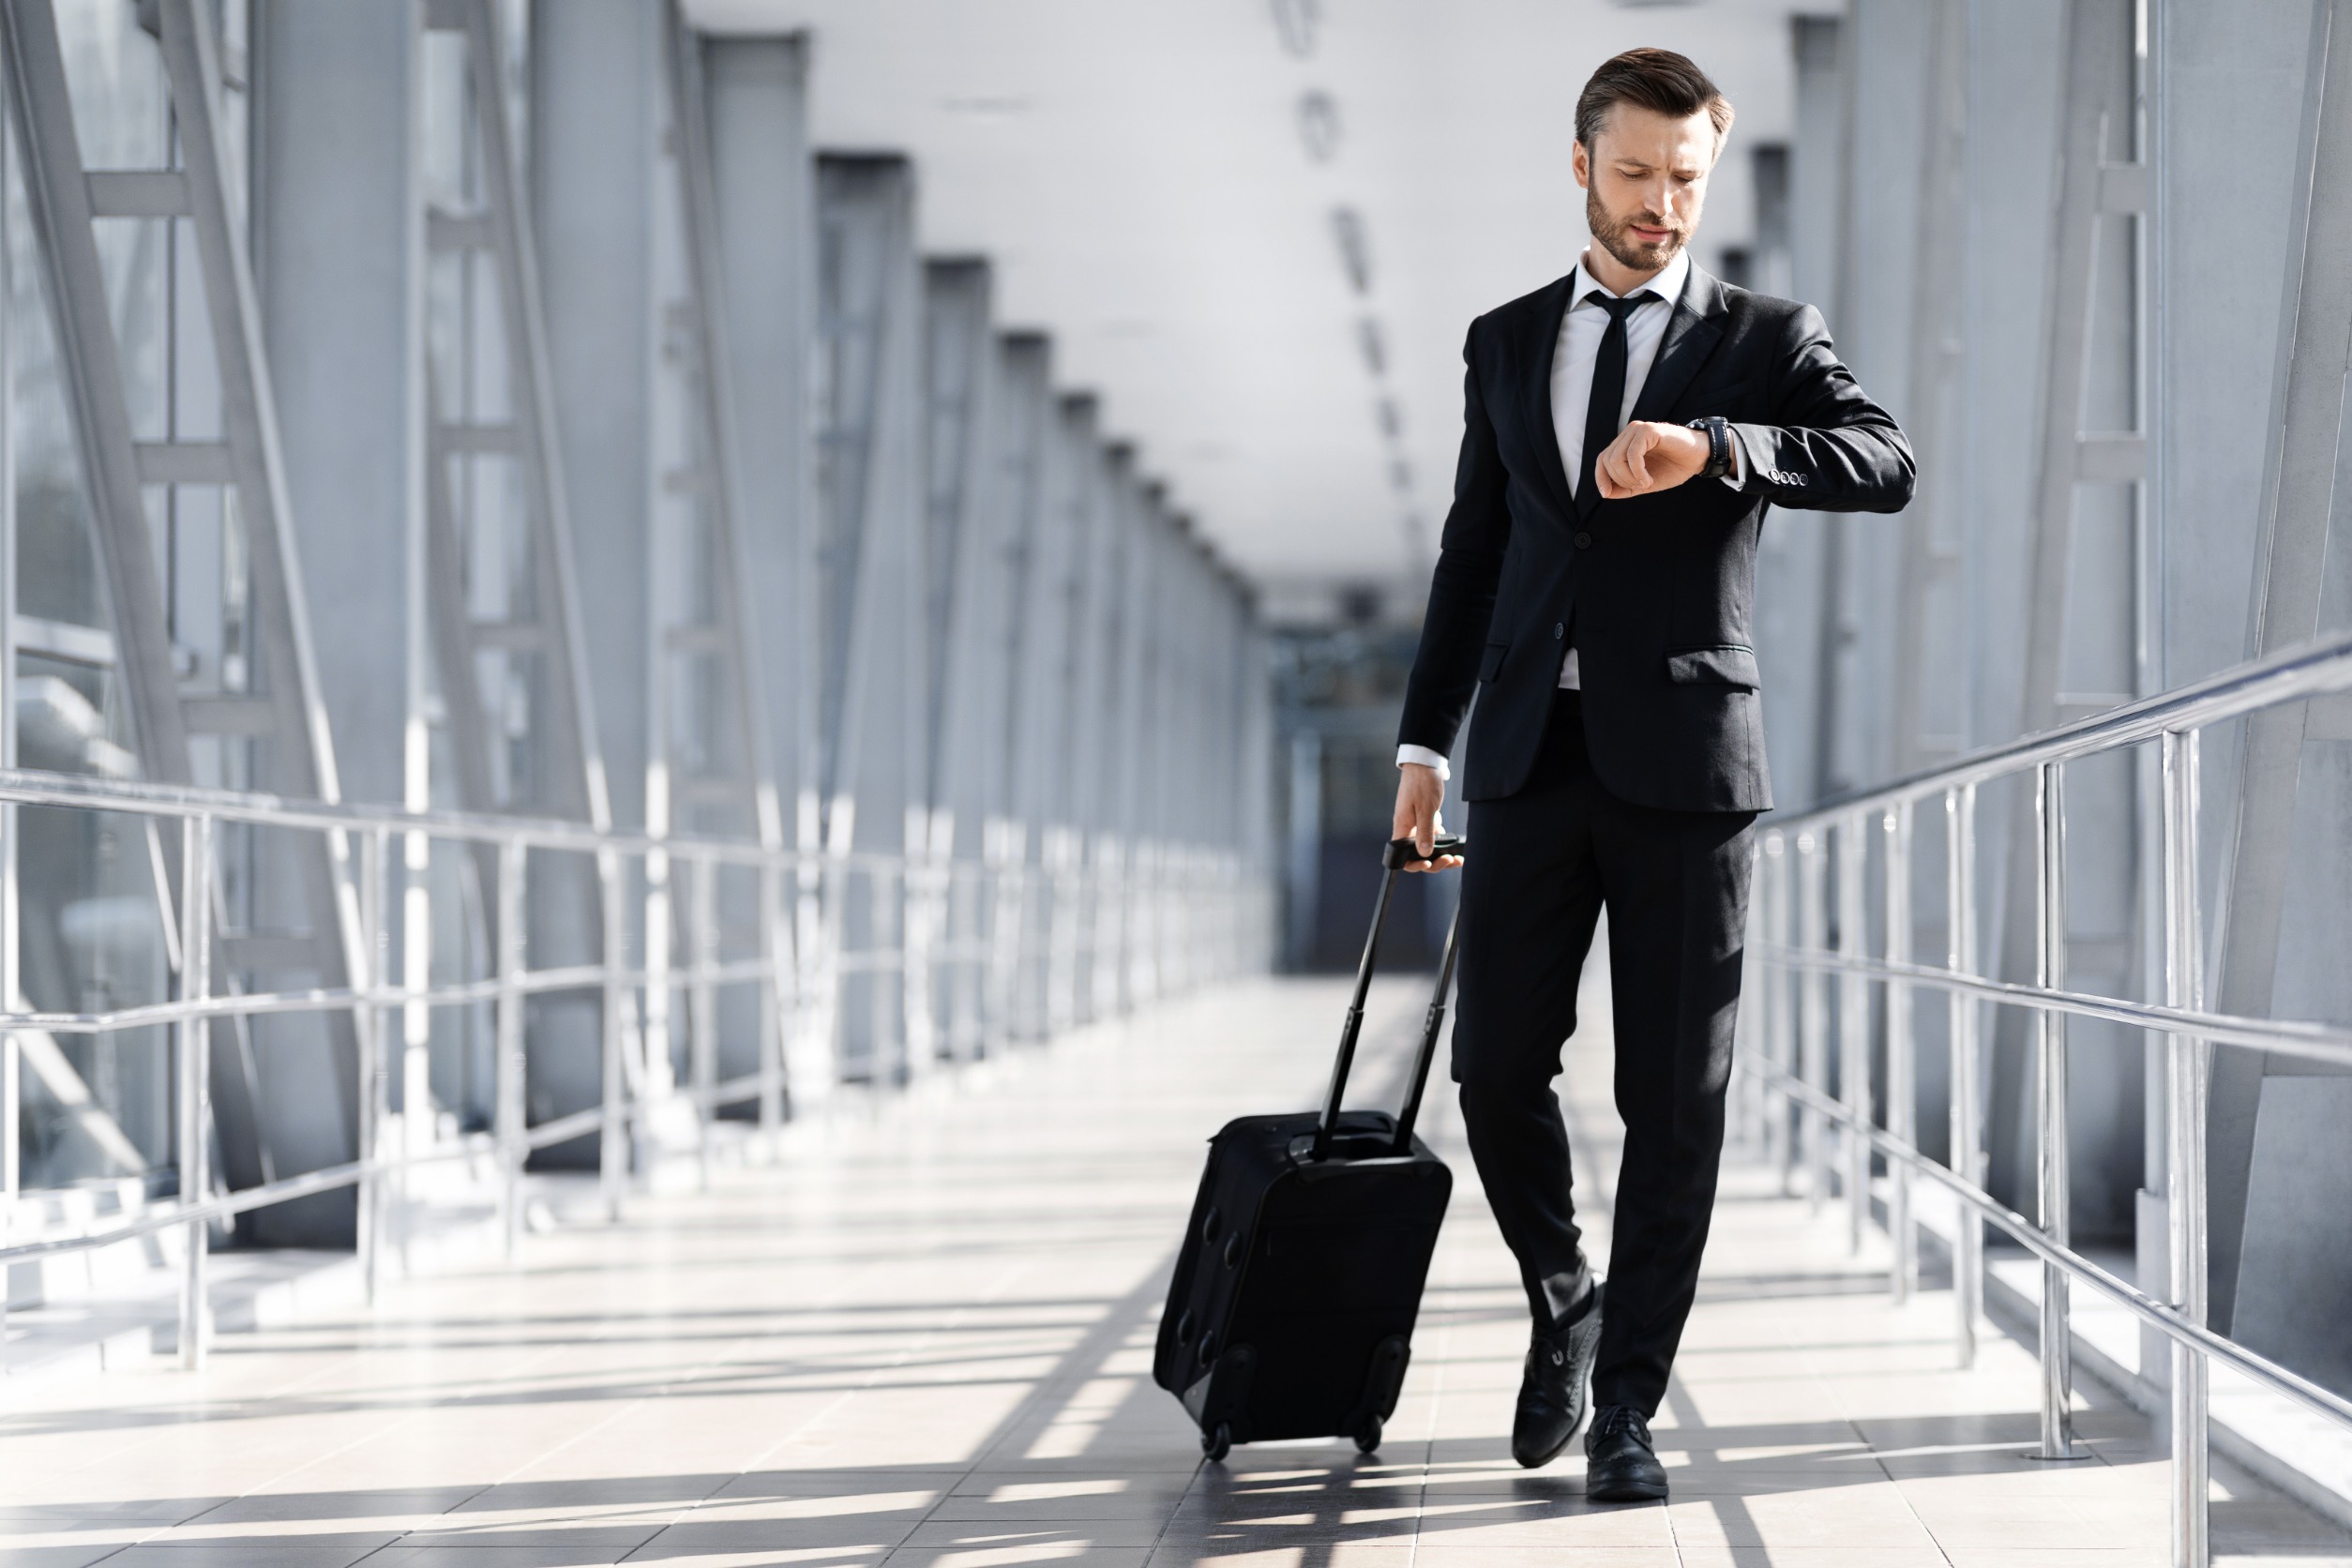 Getting Ready For Increased Business Travel With A New Expense Management System